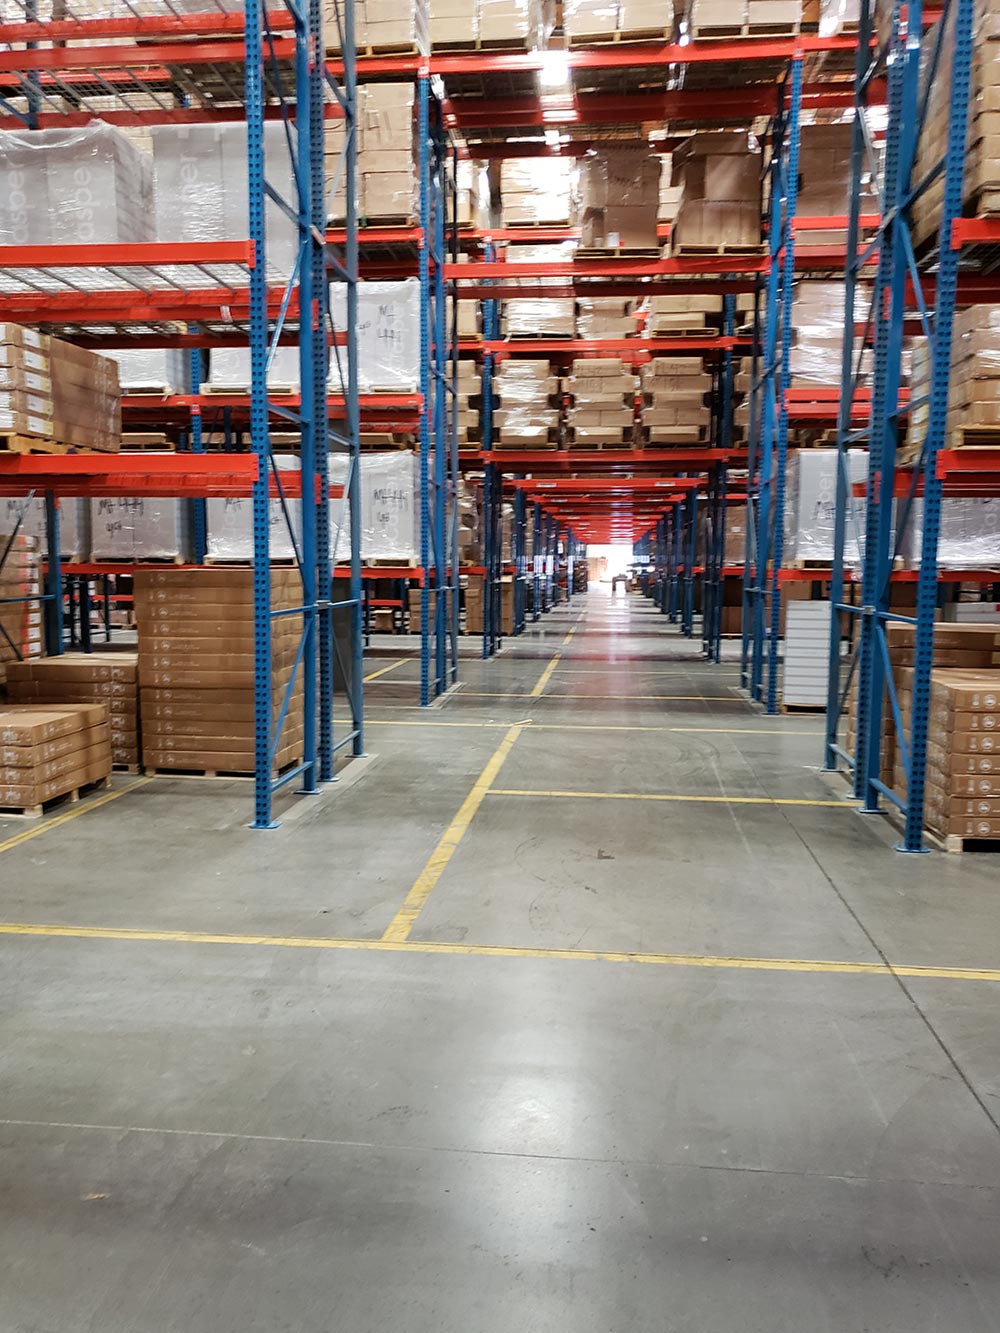 Pallet Racking Tunnel Bay View Fresno, Bakersfield Rack And Shelving